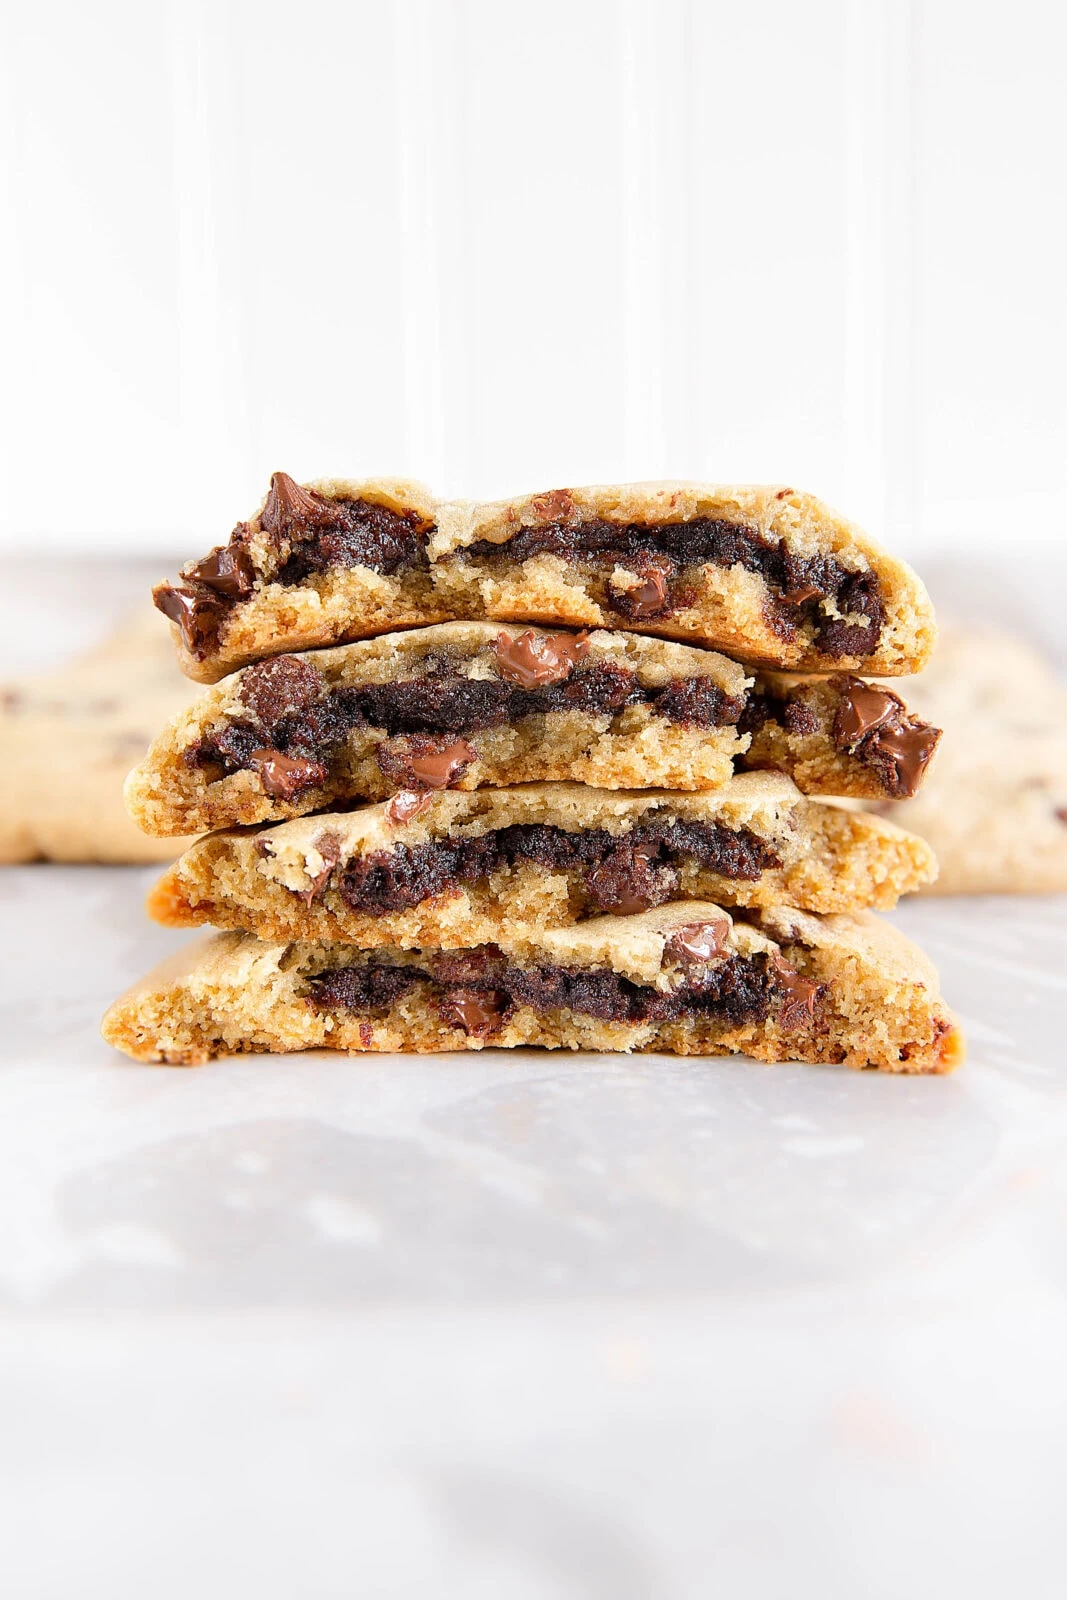 Brownie stuffed chocolate chip cookies combine the best of both worlds- a fudgy brownie center and soft and chewy chocolate chip cookies! These babies are dangerously good.